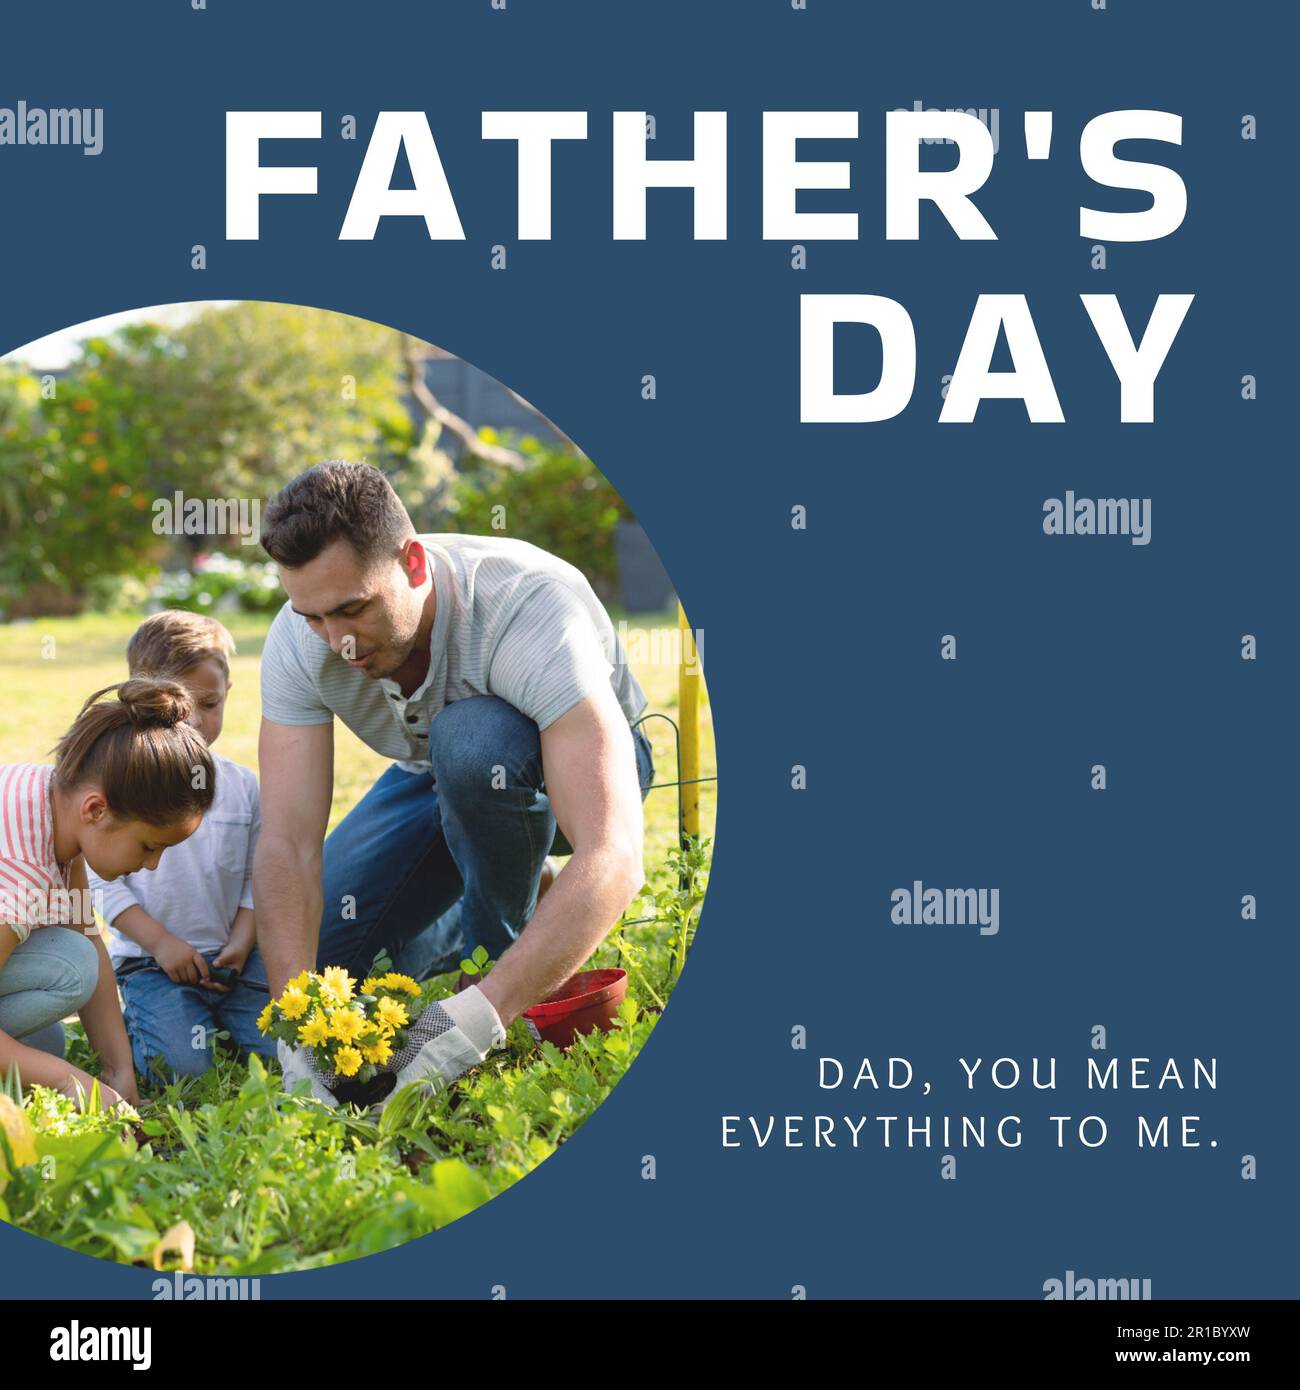 Composition of father's day text over caucasian father with son and daughter gardening Stock Photo